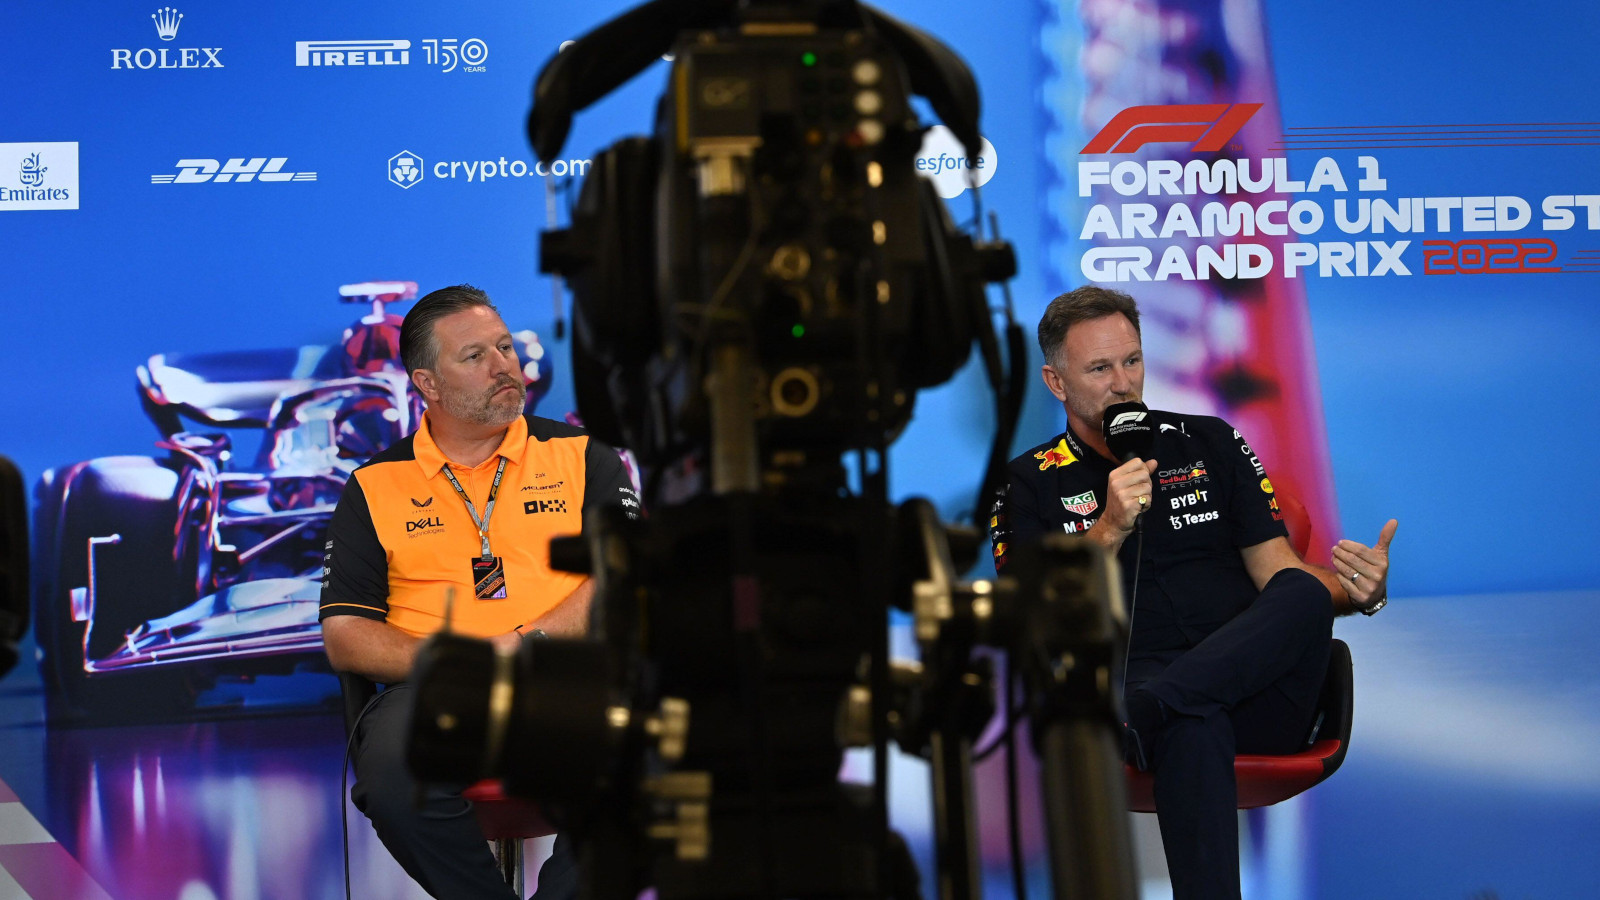 Zak Brown and Christian Horner with the camera dividing them in a press conference. Austin October 2022